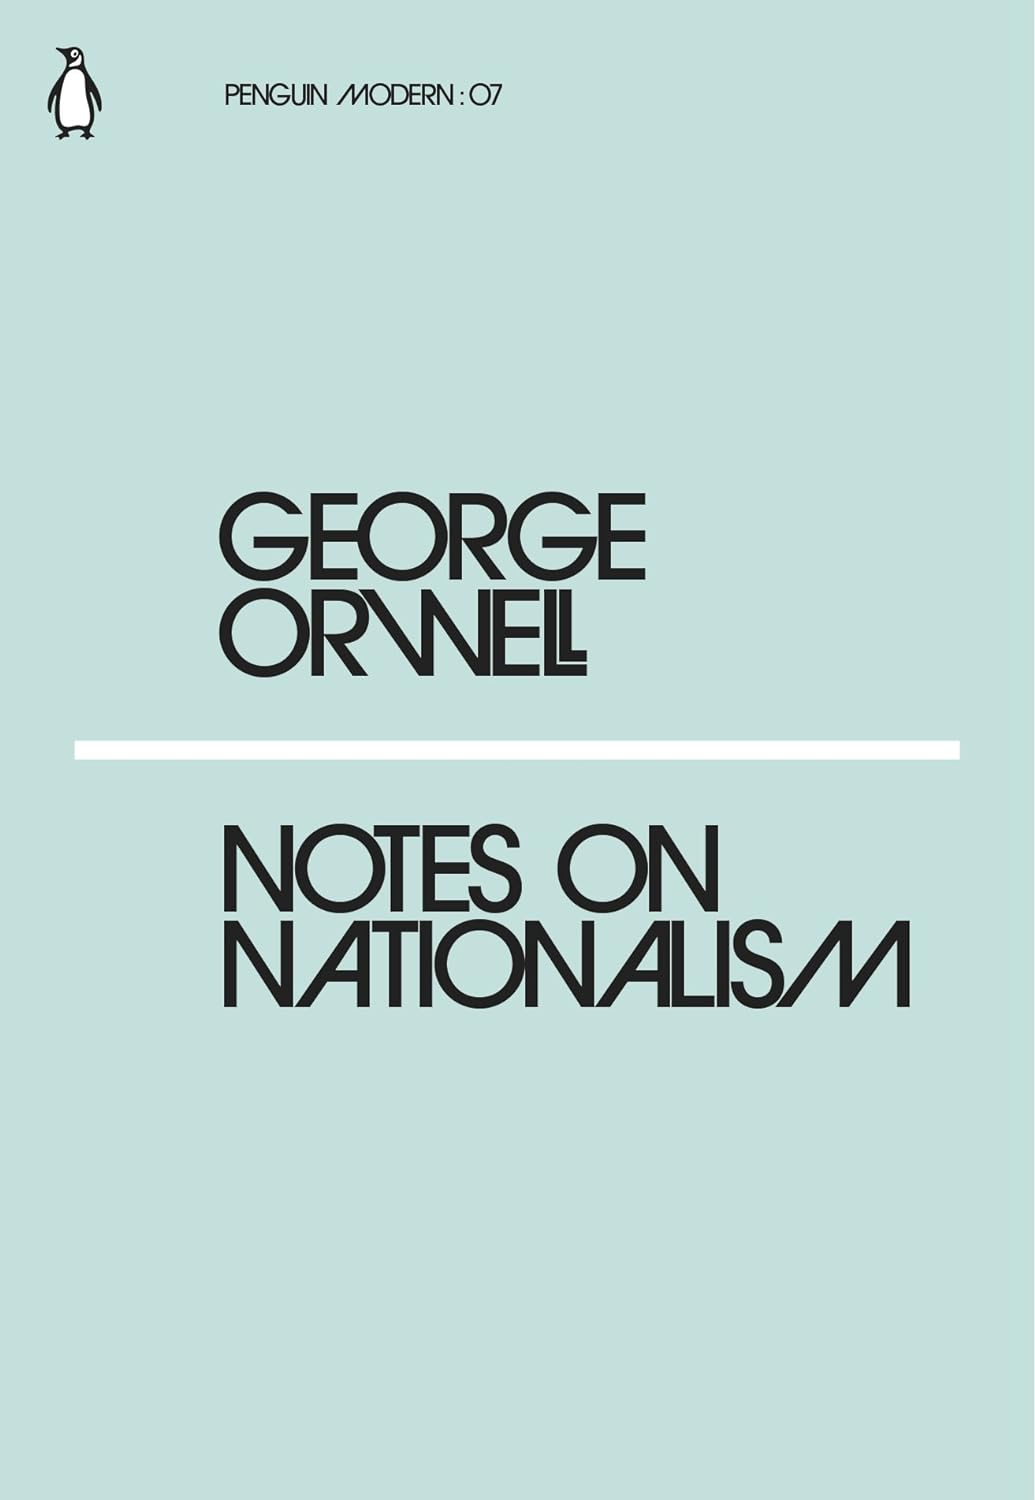 Notes on Nationalism by George Orwell